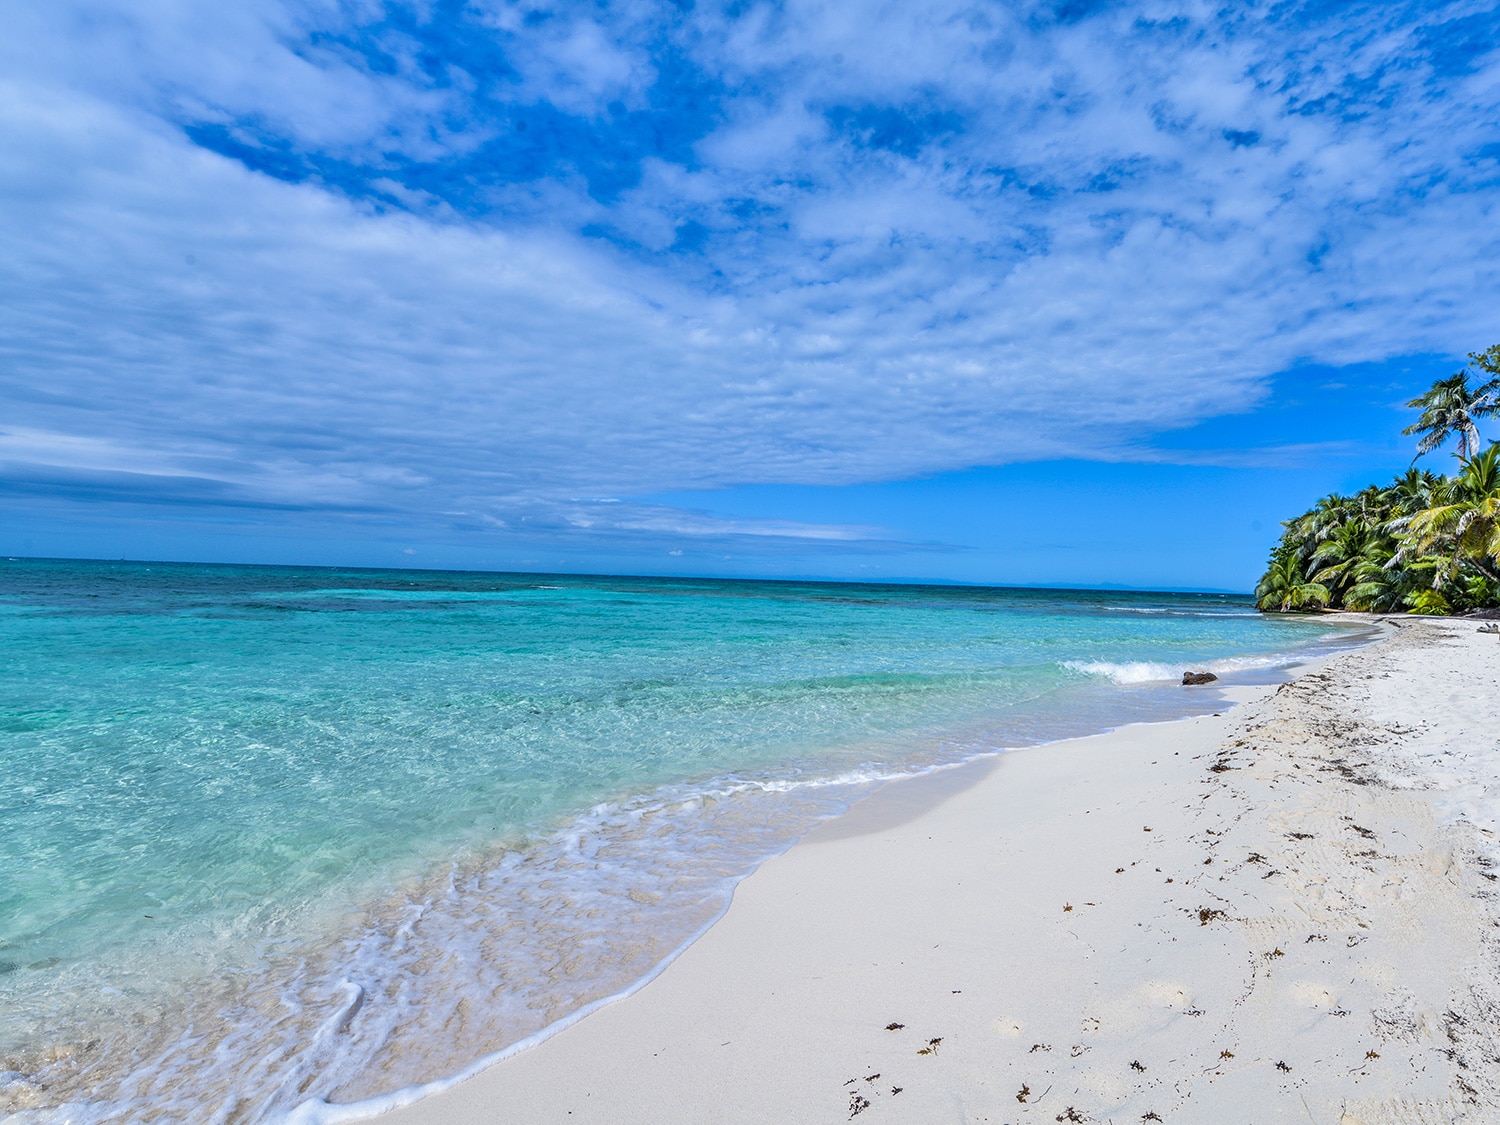 Ranguana Caye is one of the most beautiful beaches in Belize.